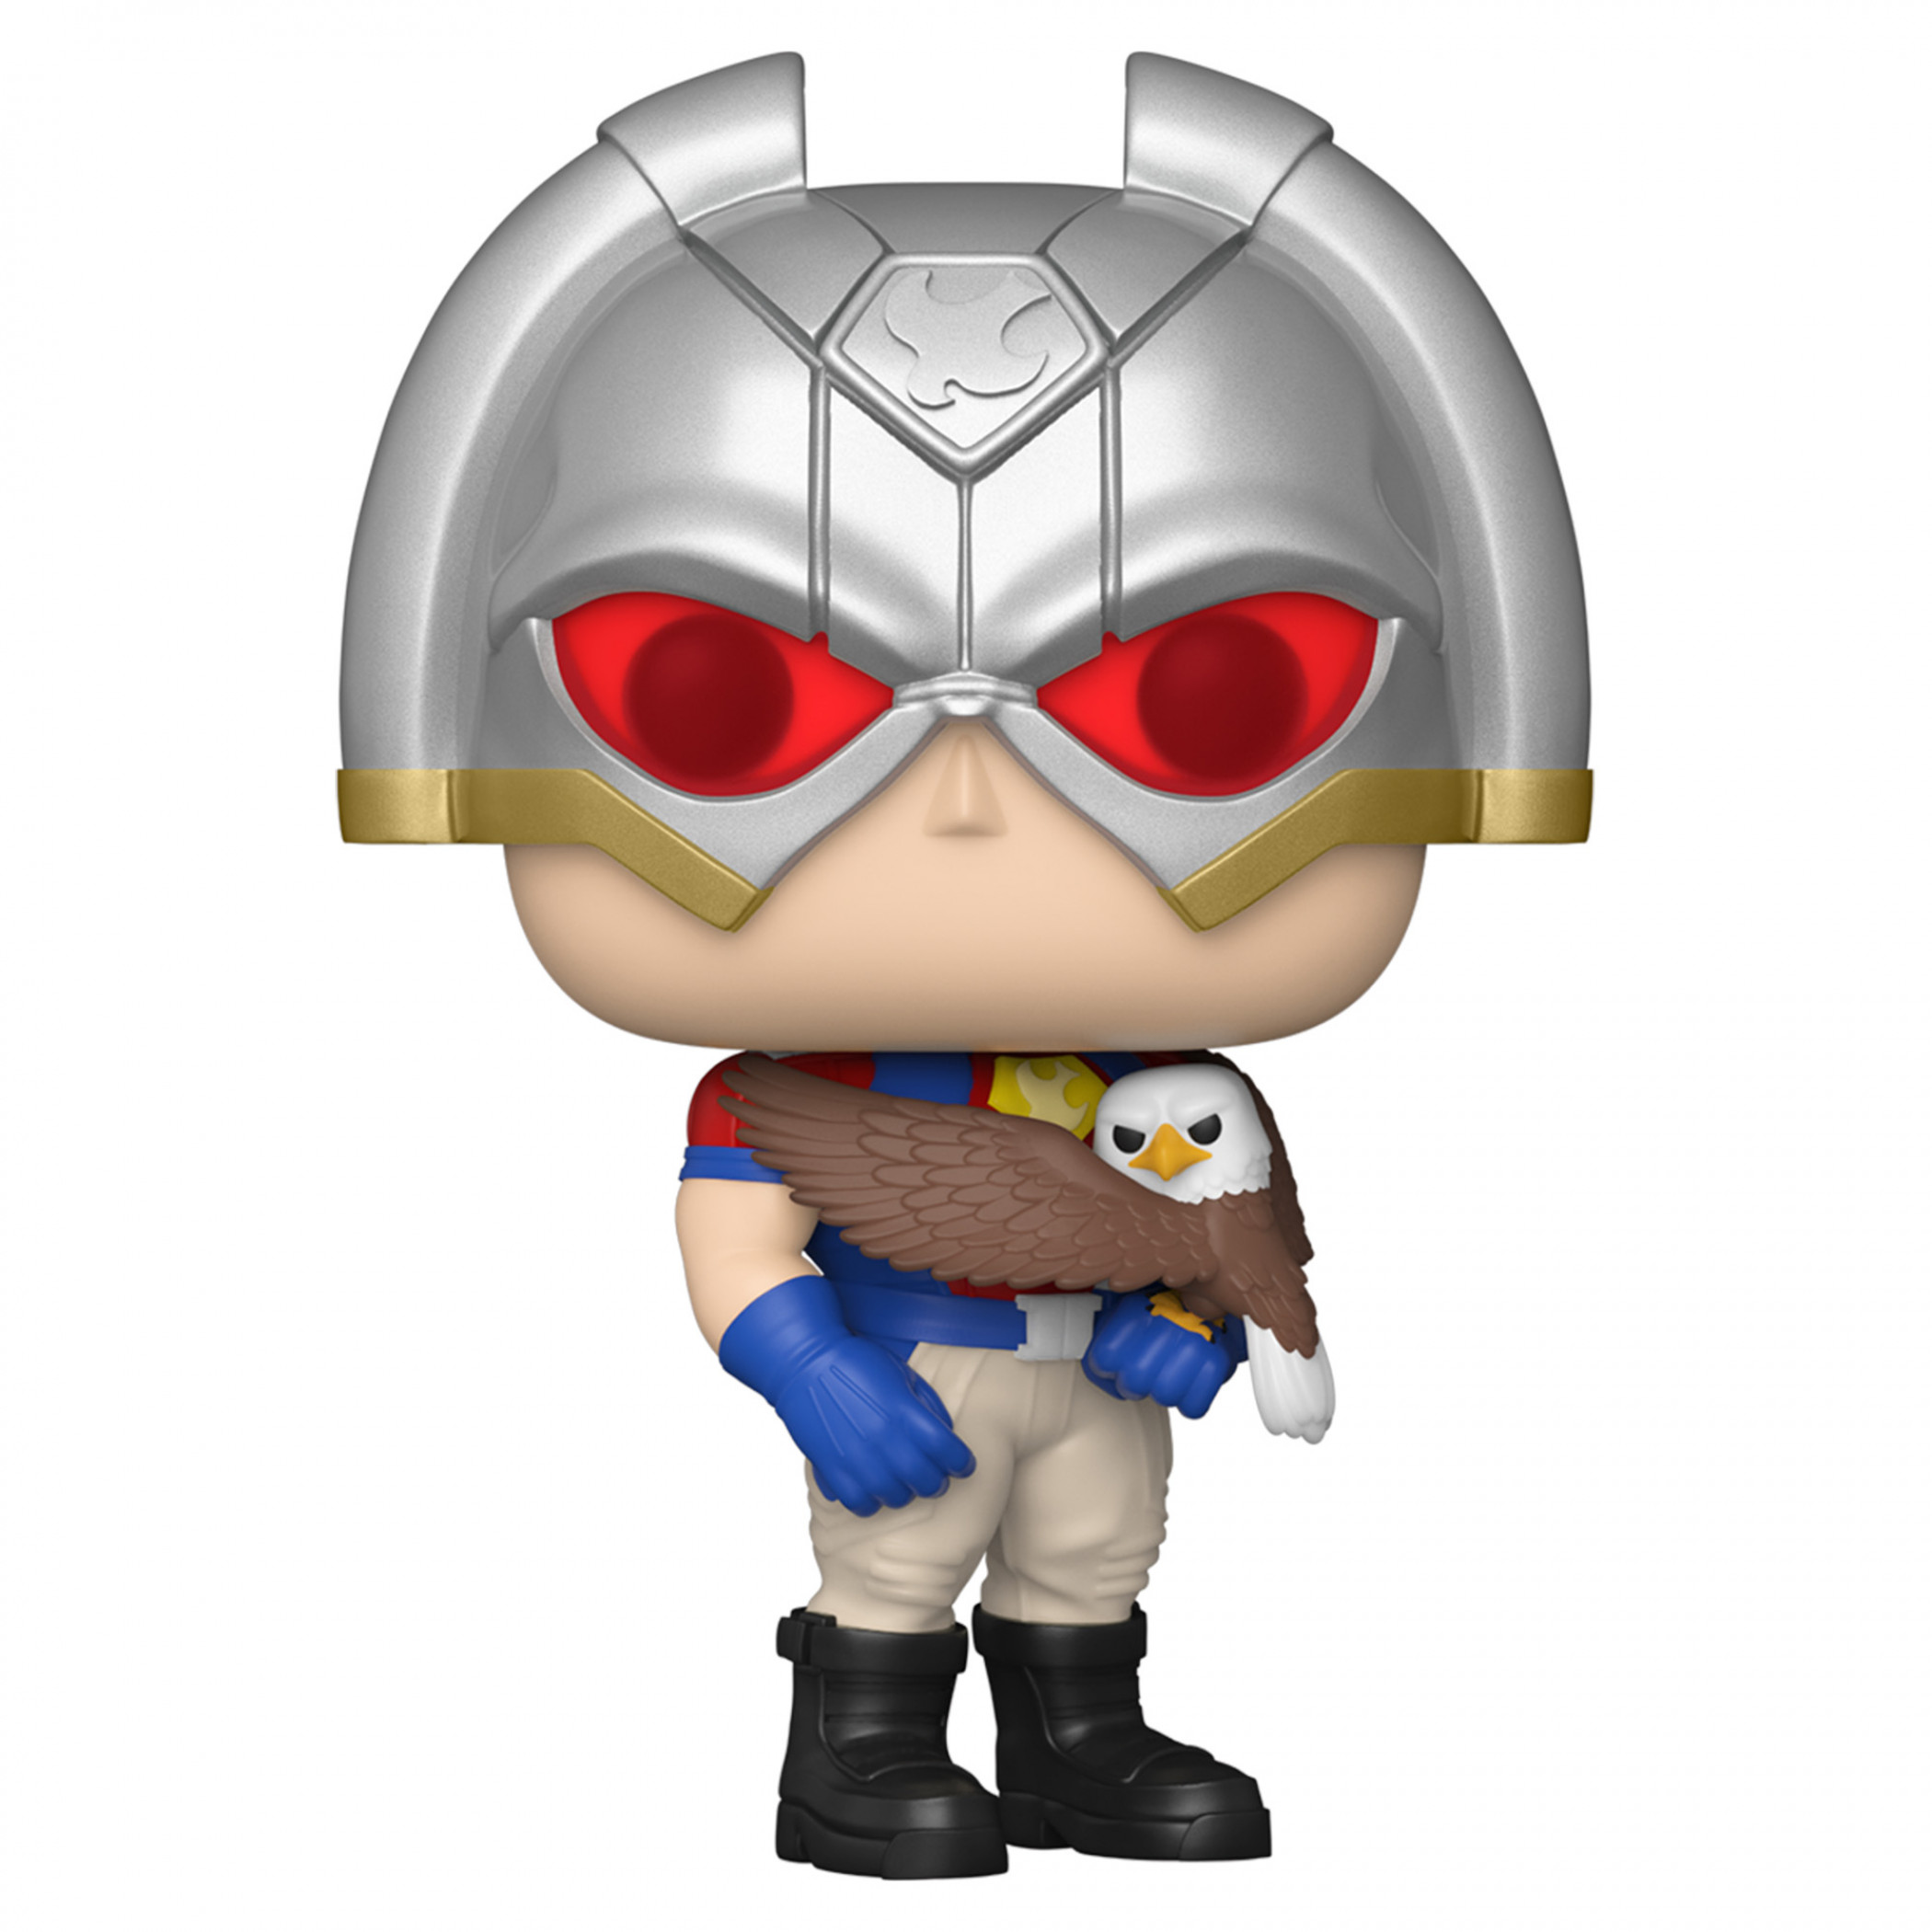 DC Comics Peacemaker Peacemaker with Eagly Funko Pop! Vinyl Figure